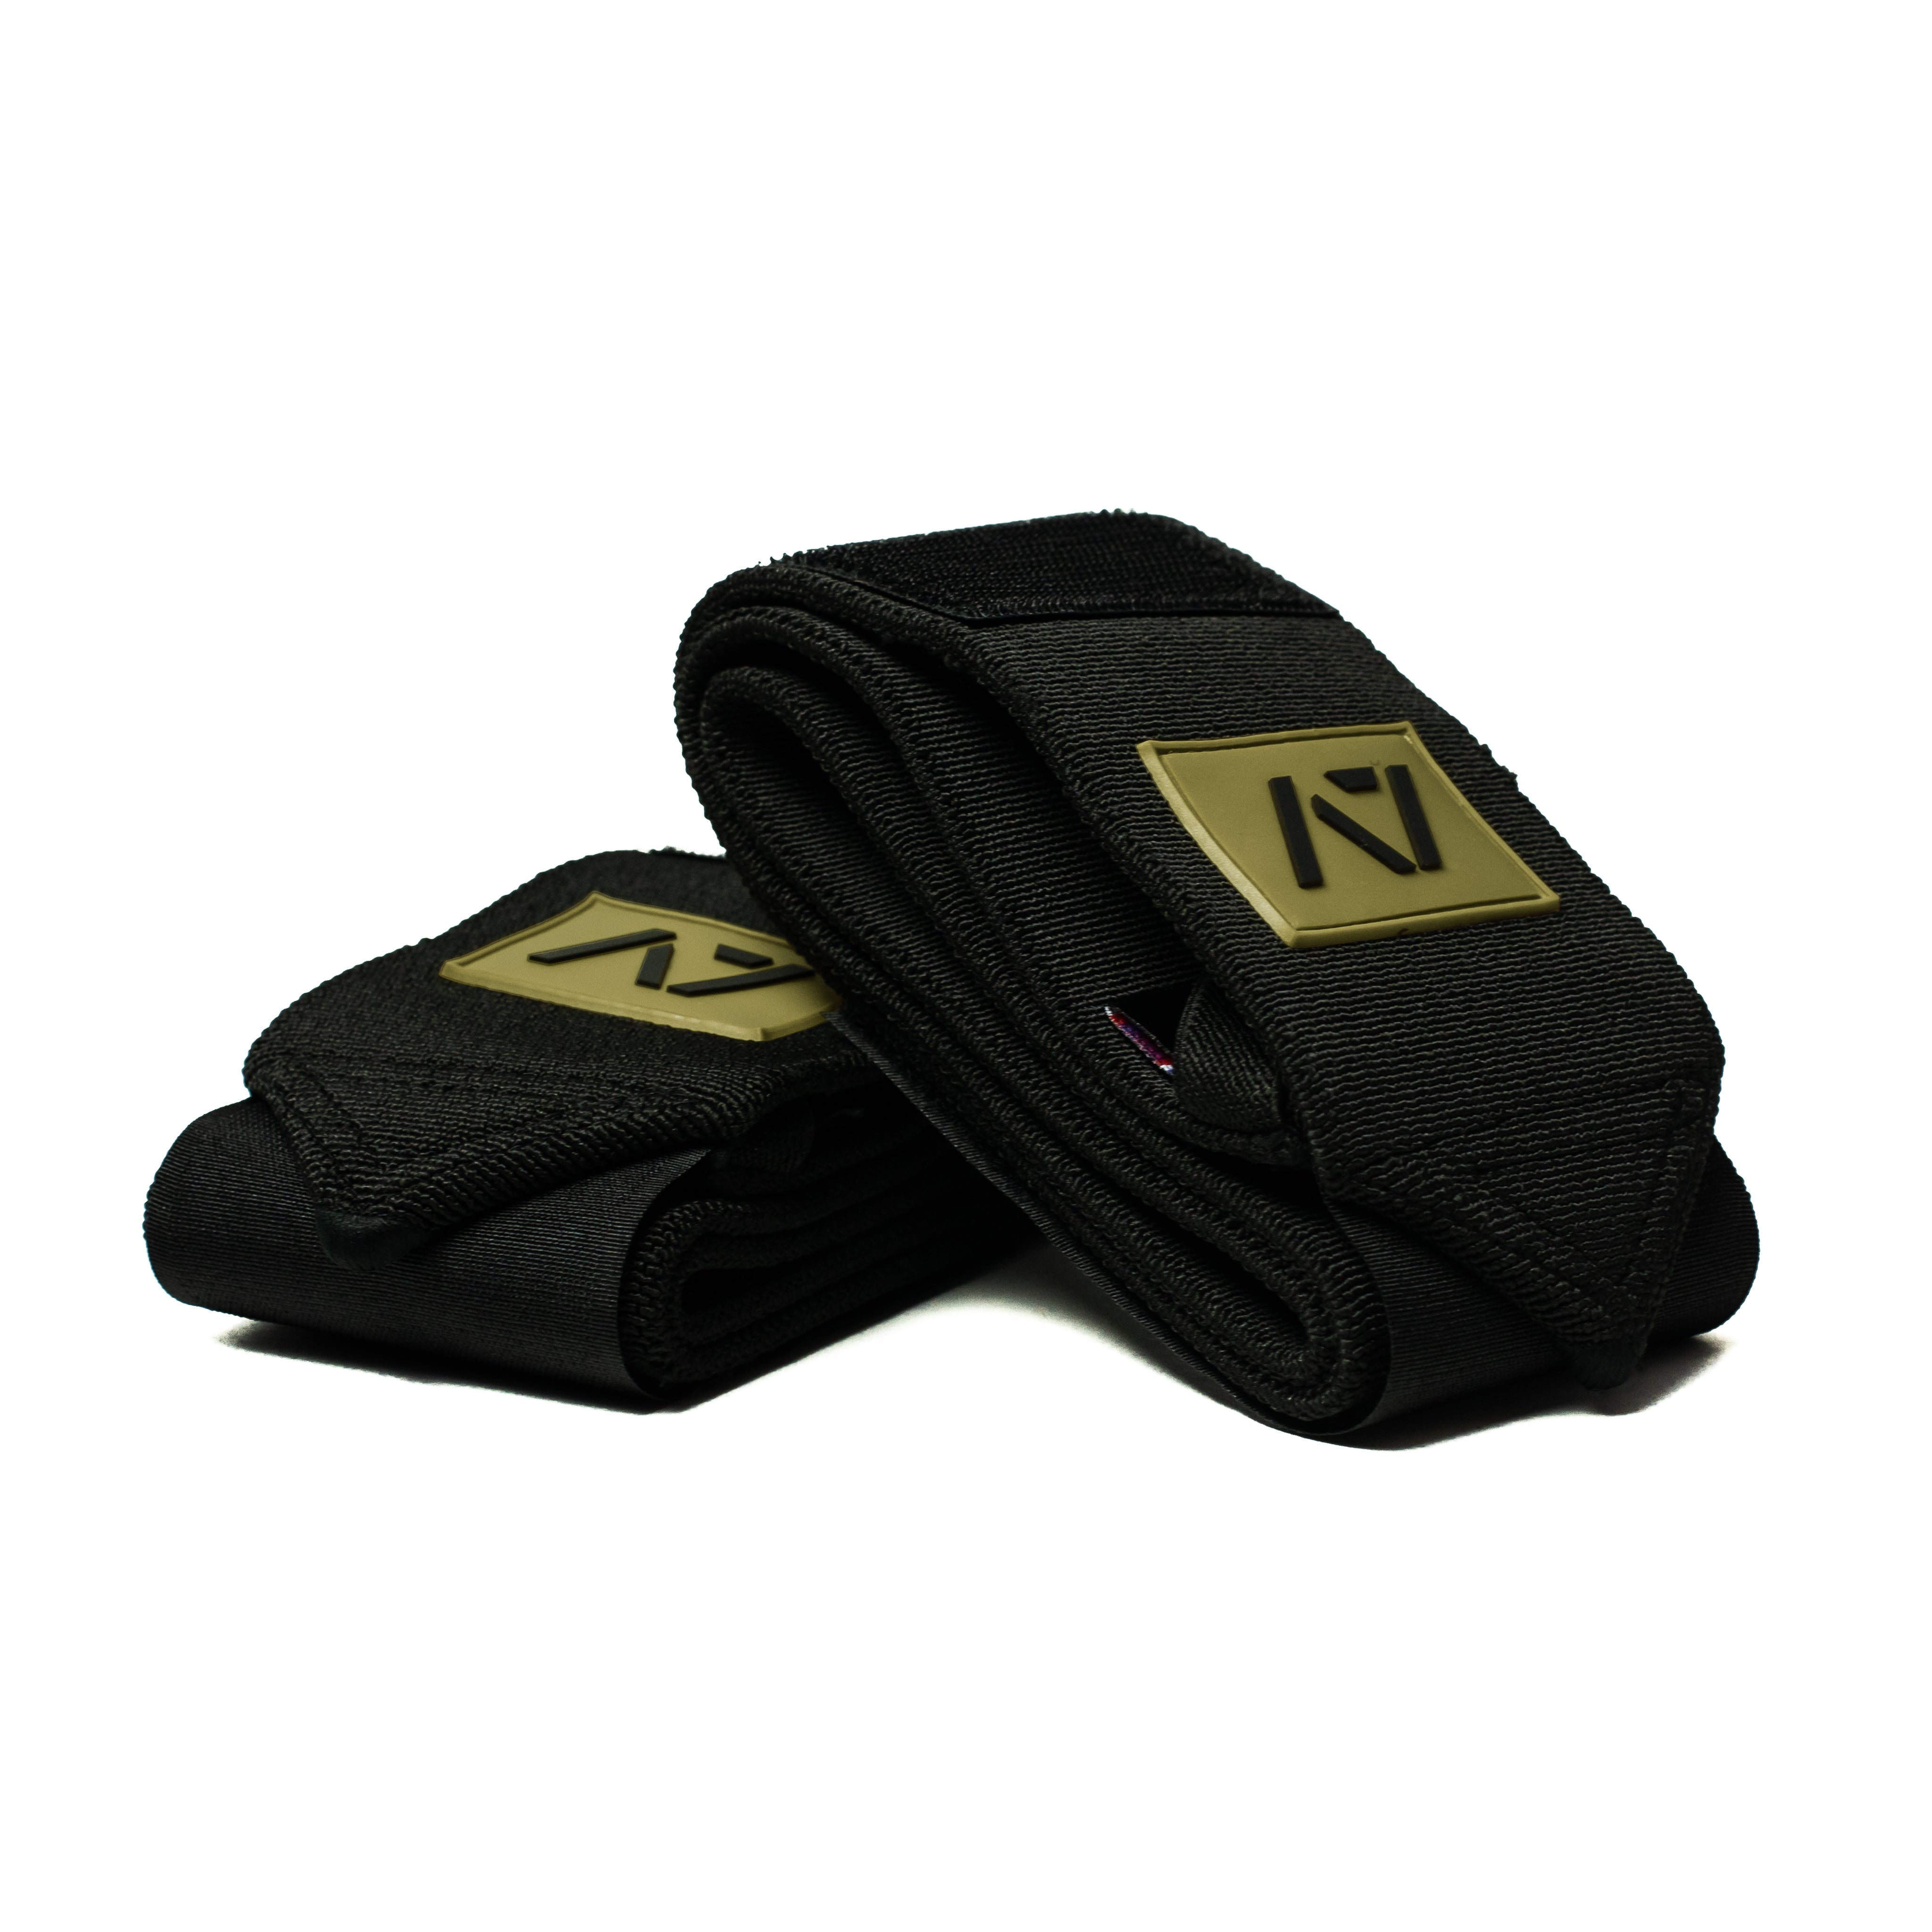 Whether you are benching or squatting, A7 wrist wraps are a perfect addition to your gym bag and IPF approved kit. These wraps feature double thumb loops so you don't ever have to worry about which way you have to put them on. We offer these wrist wraps in 3 sizes : 55 cm, 77 cm and 99 cm. A7 Wrist Wraps are IPF approved.